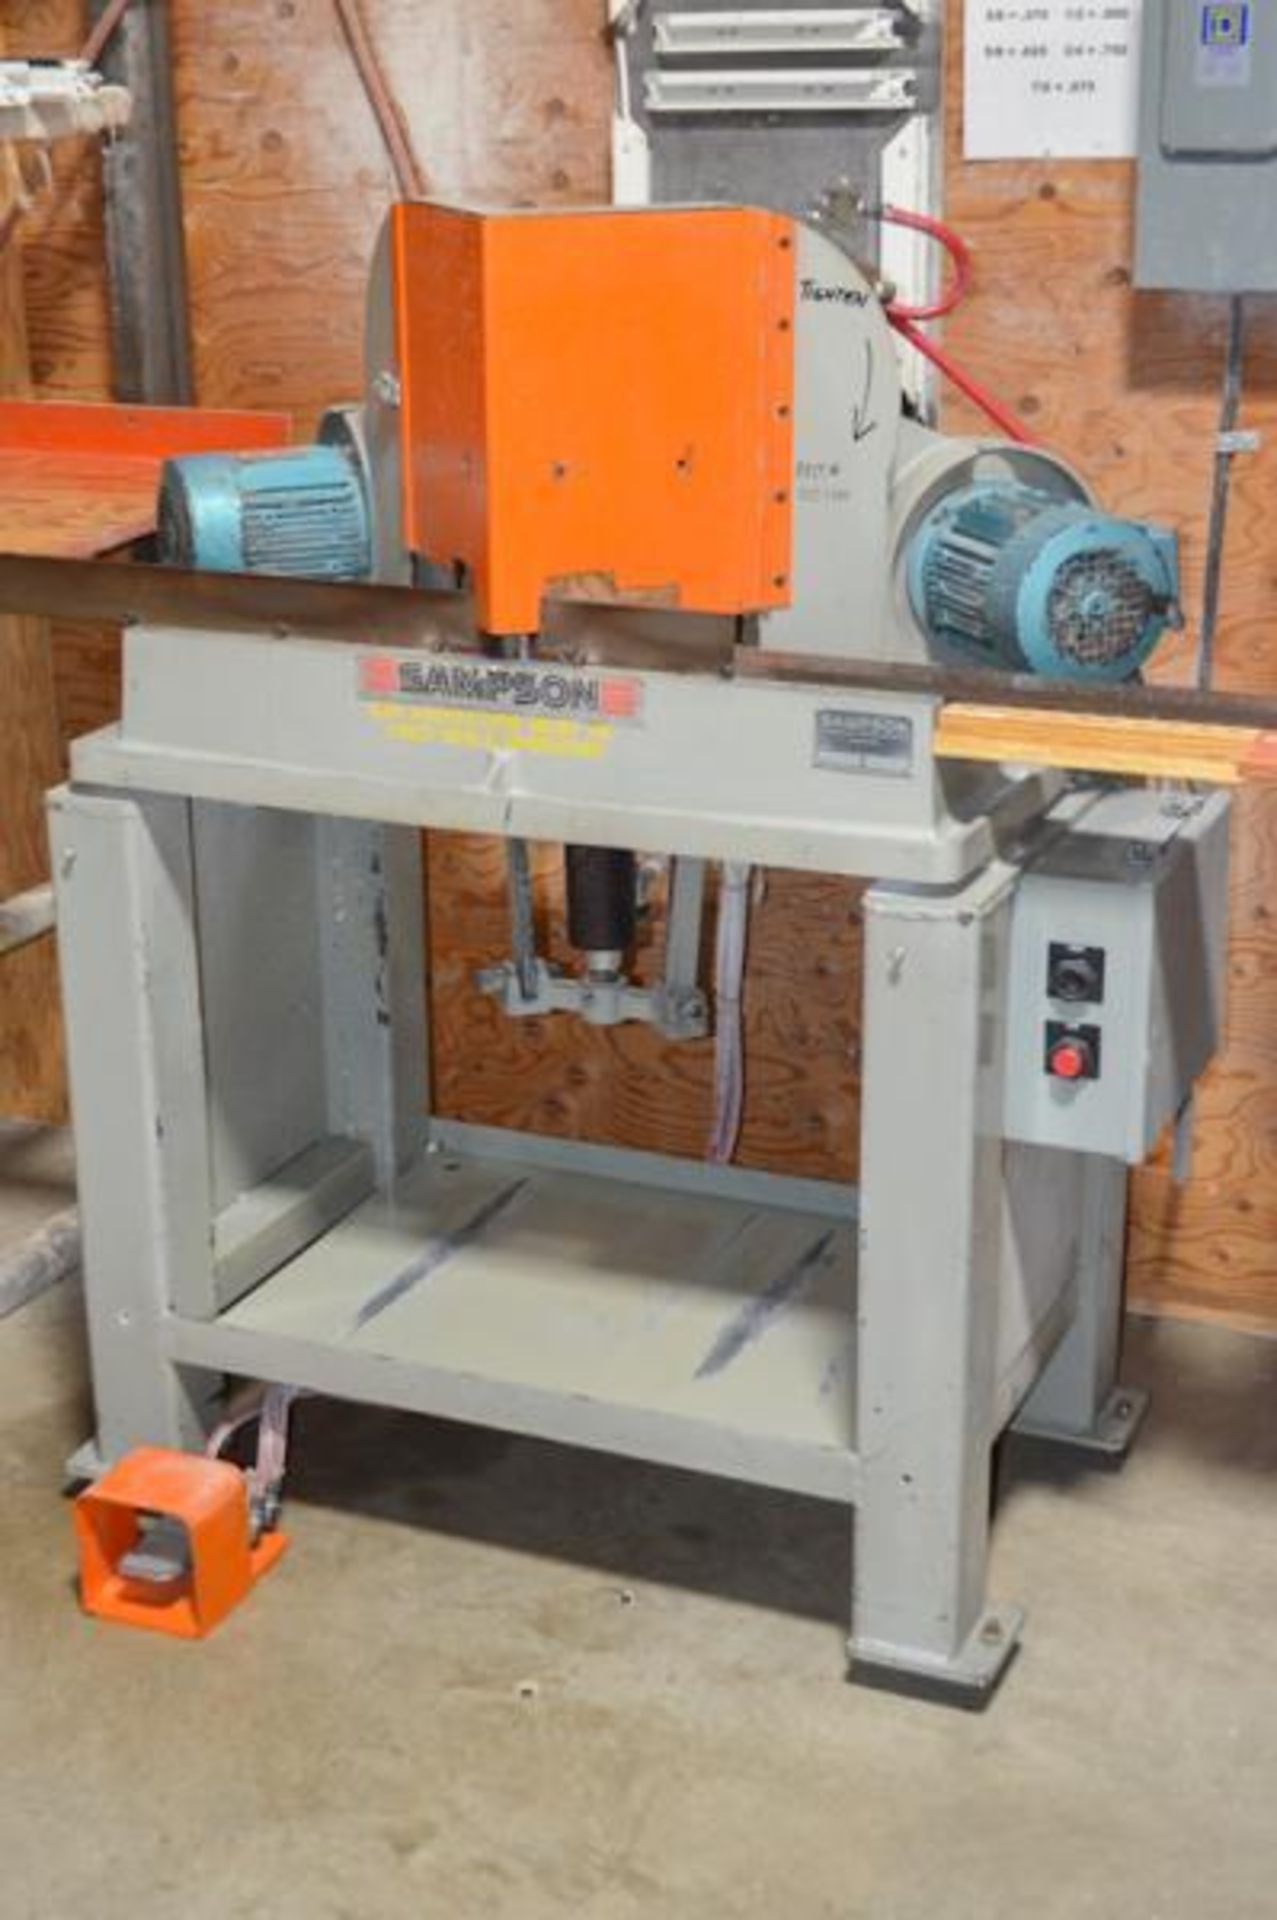 SAMPSON MN 12 12” DOUBLE MITER SAW, 5.75” X 31.5” X 35”H TABLE SIZE, CUTTING CAP. 5.5”H X 1”W AT MAX